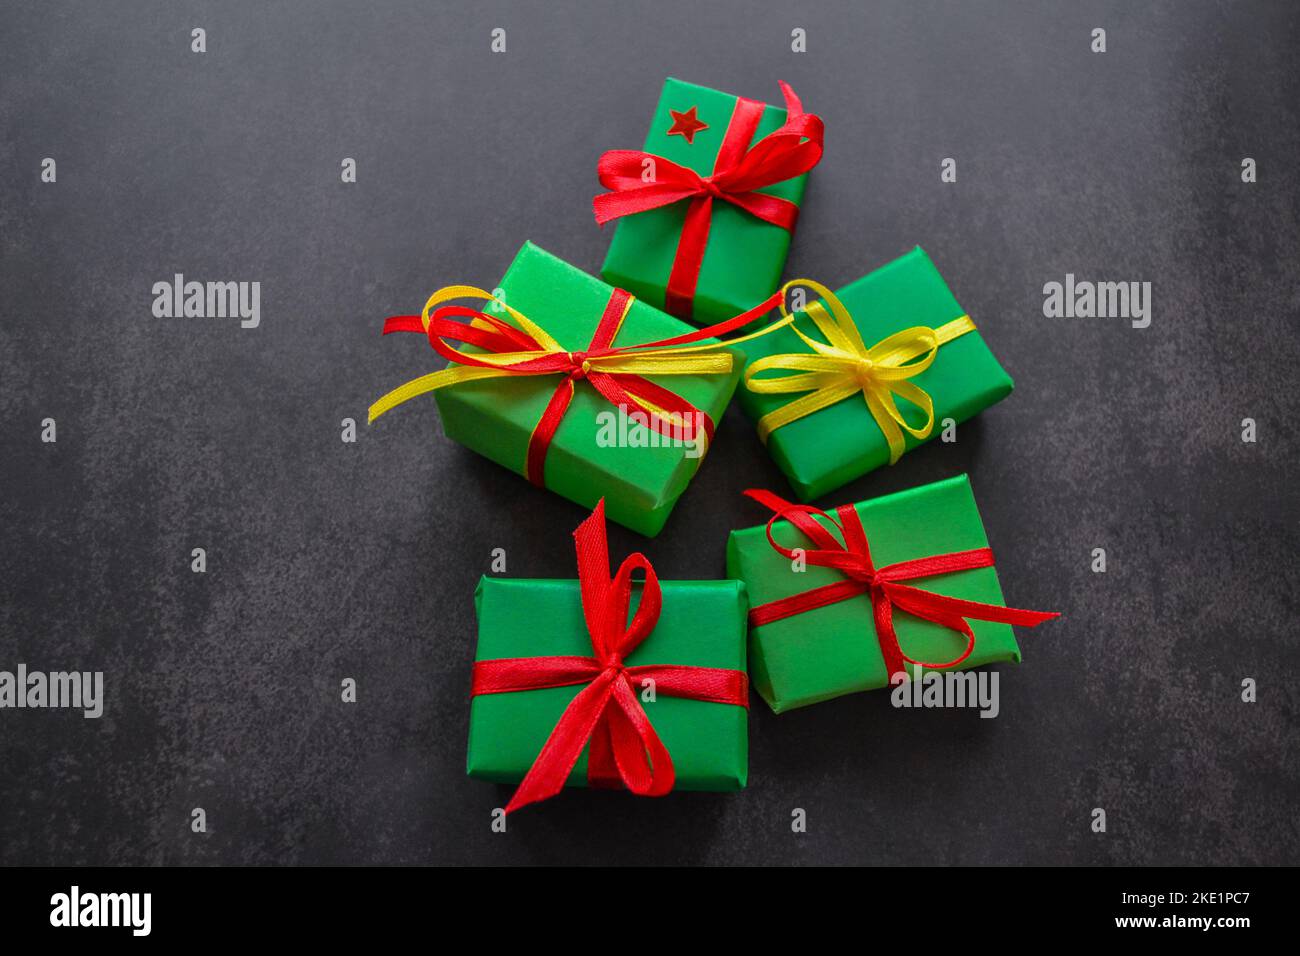 Gifts in green paper with red and yellow ribbons lie next to each other in the form of a Christmas tree with a red star on top. Black background, copy Stock Photo